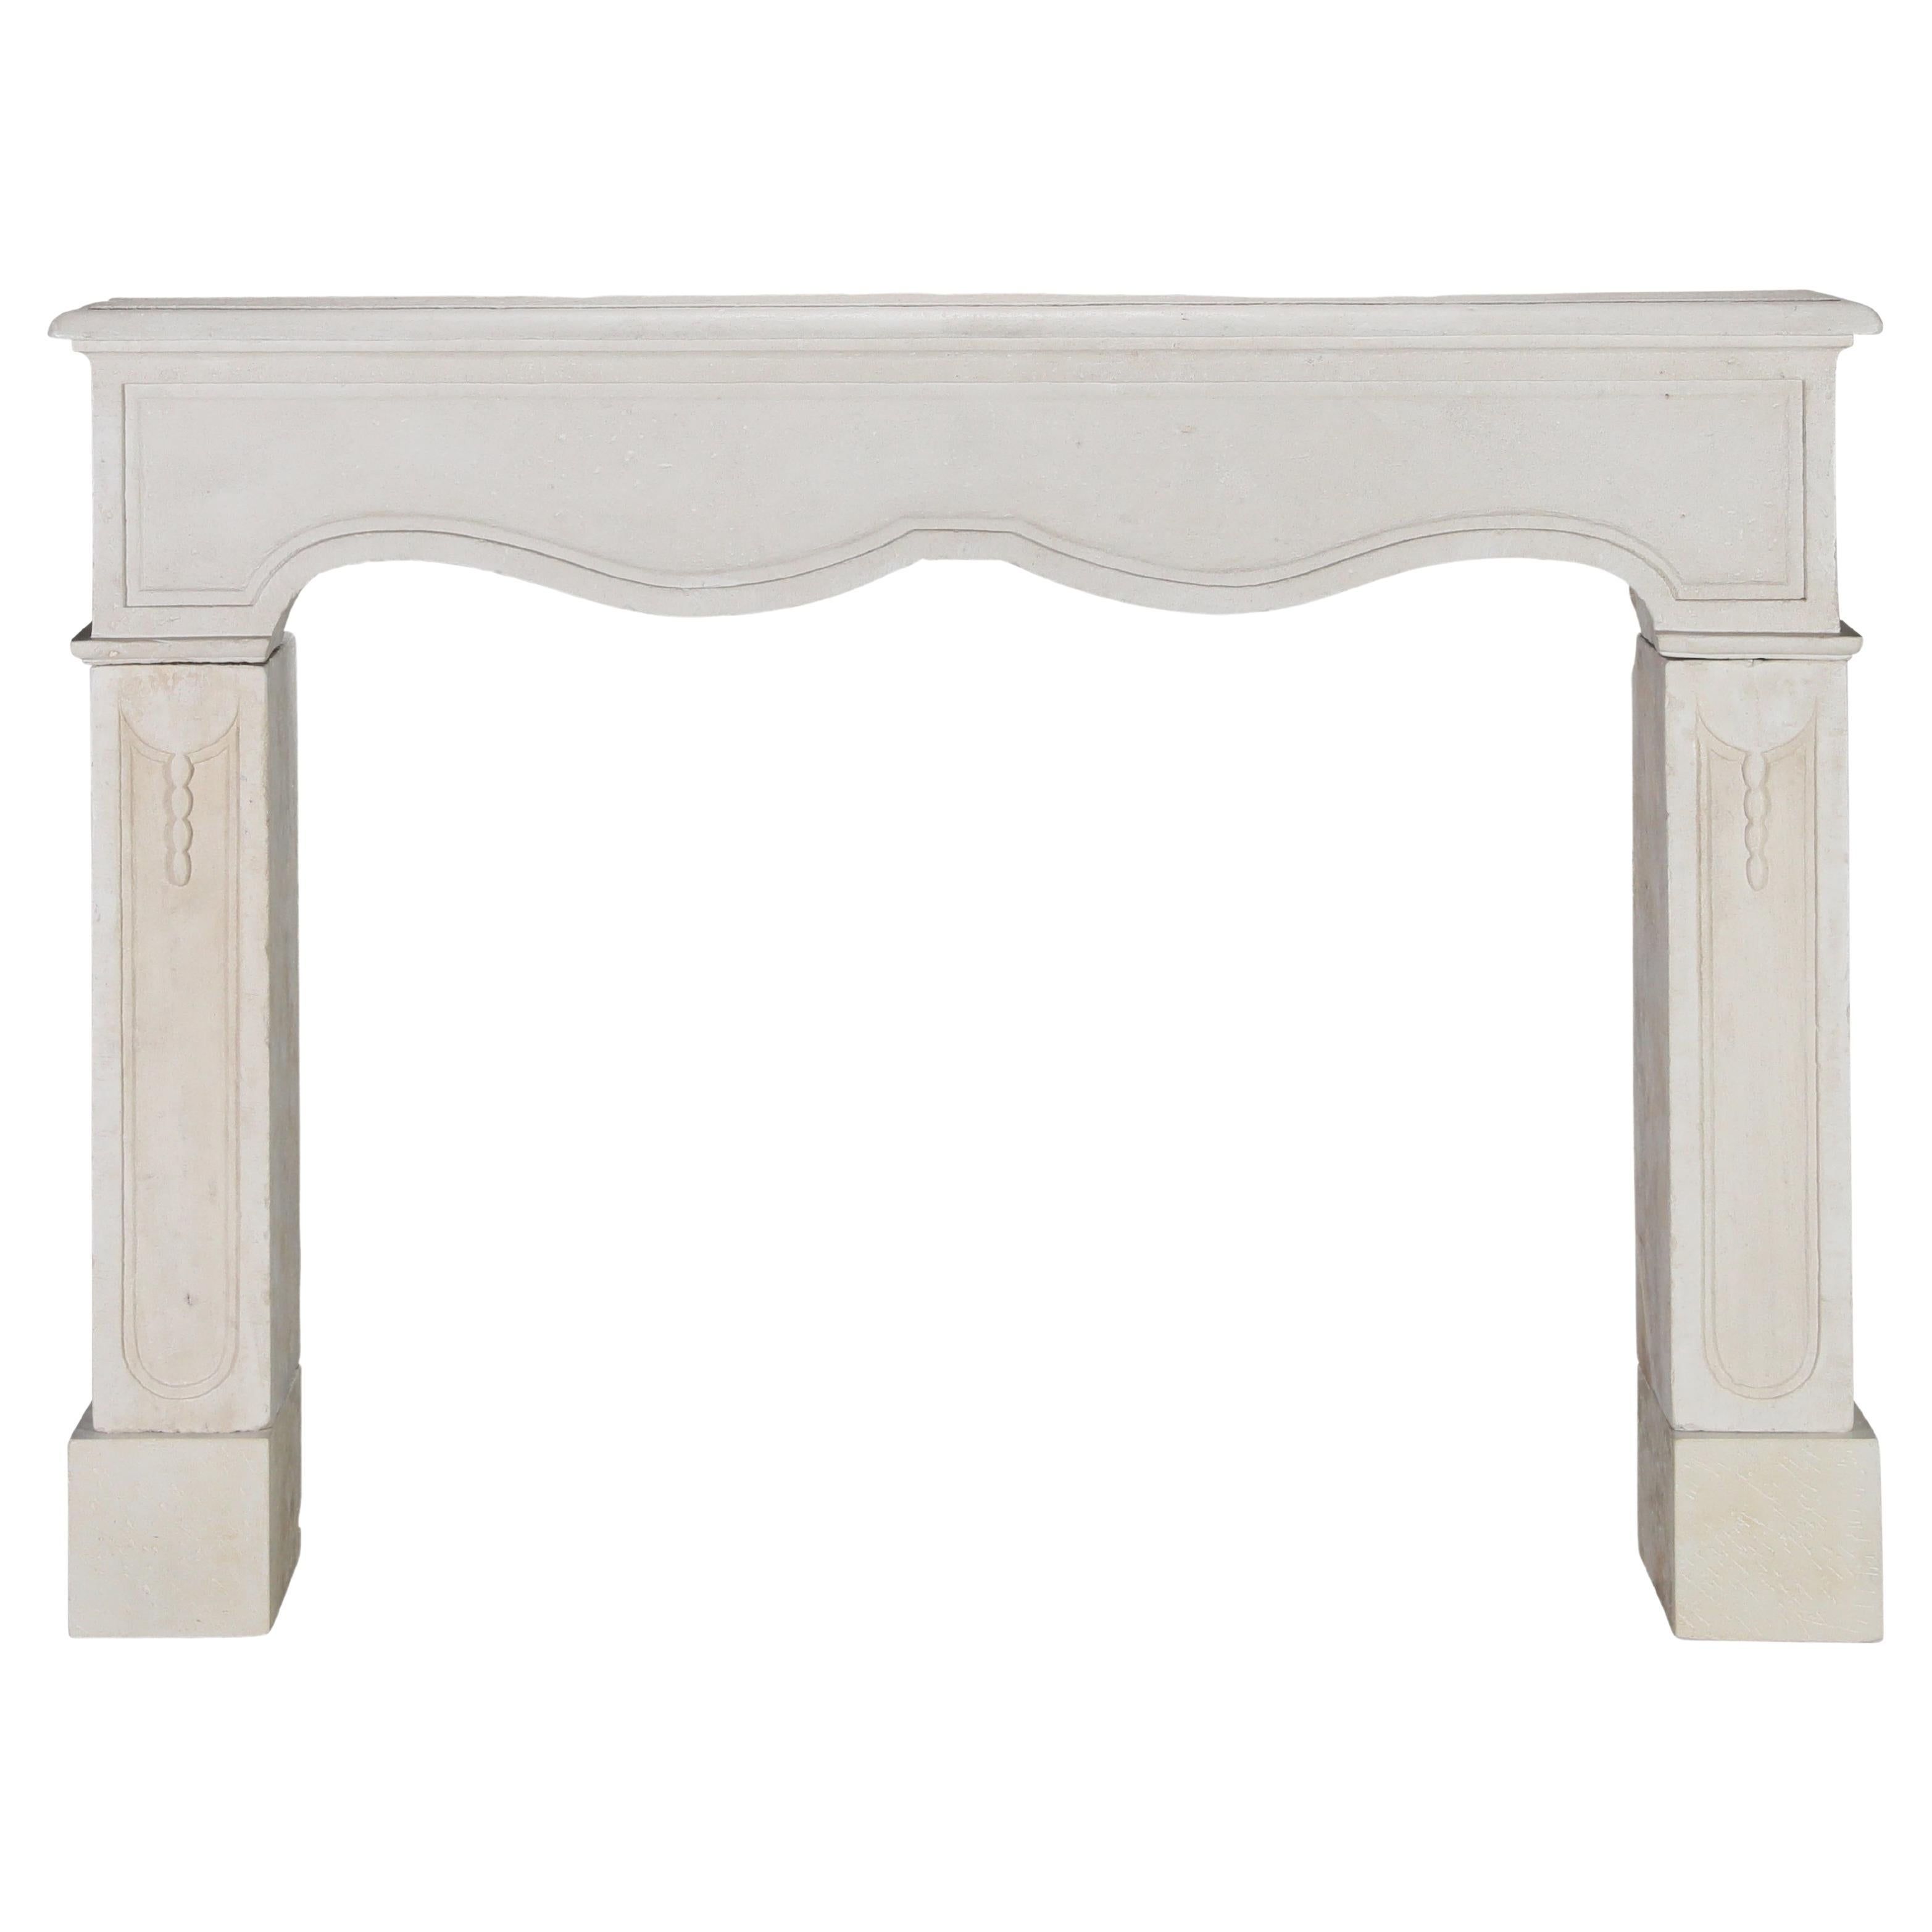 Reclaimed French Light Stone Fireplace In Timeless Louis XIV Style For Sale